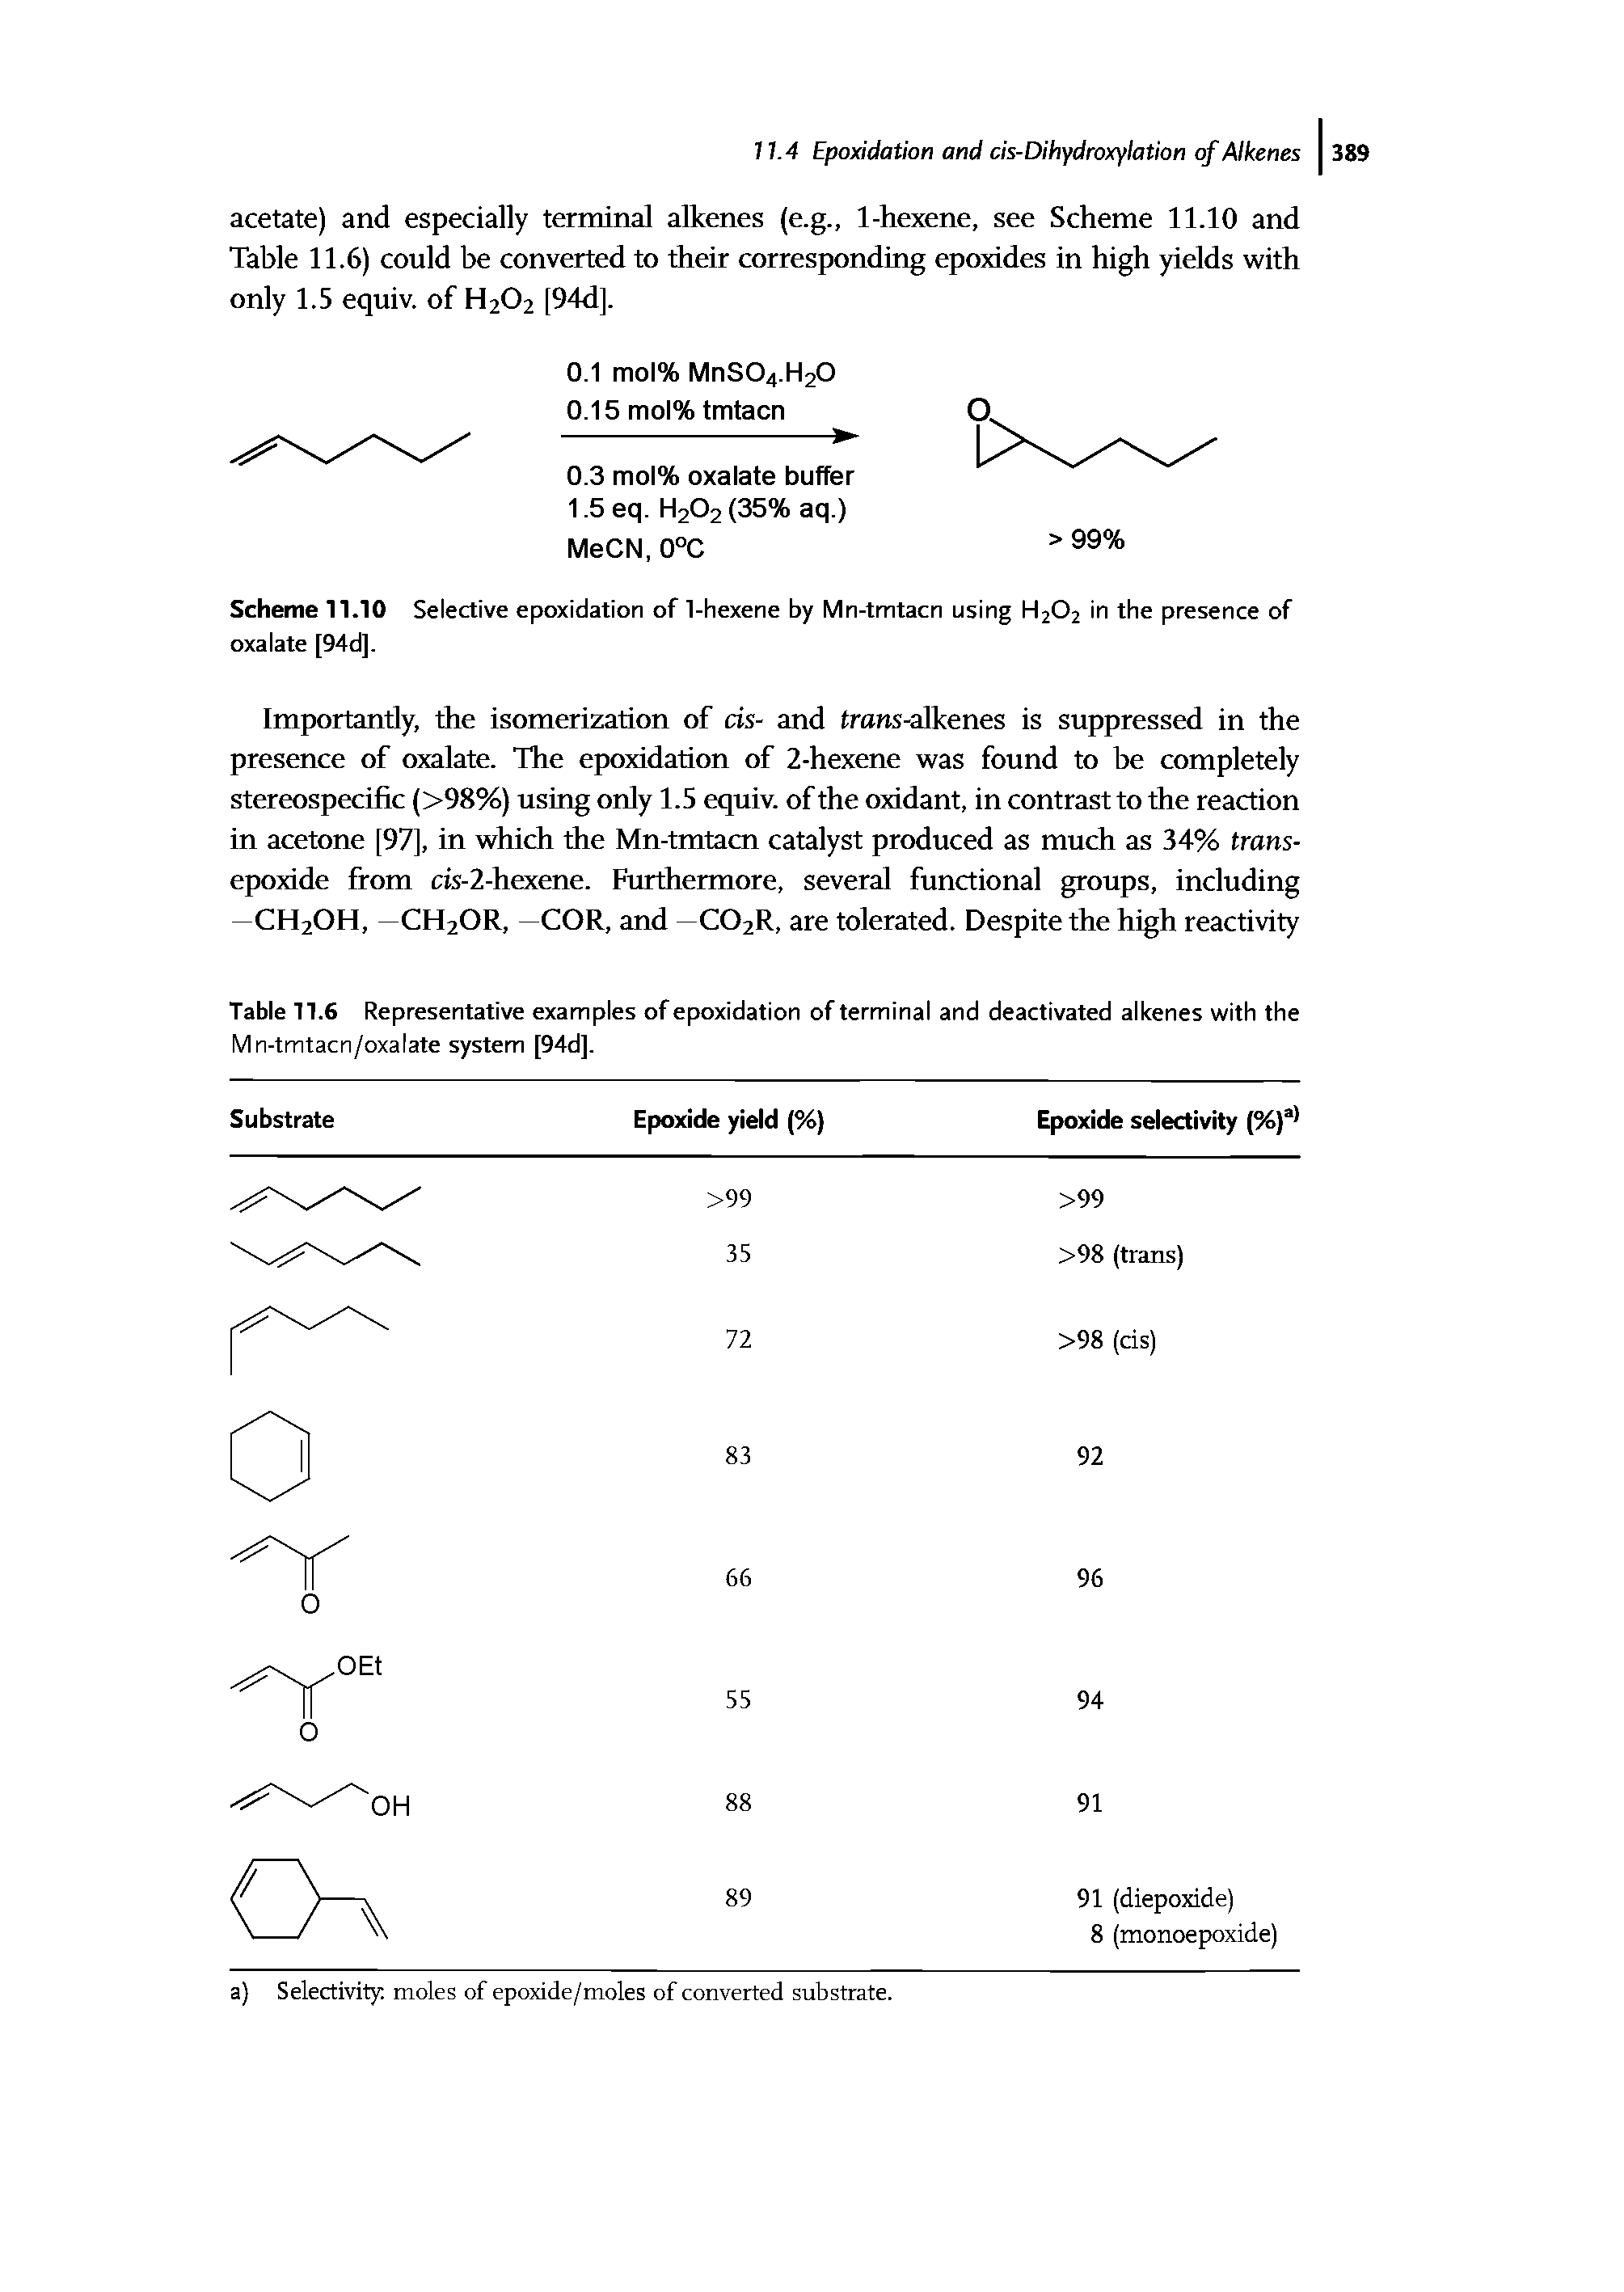 Scheme 11.10 Selective epoxidation of 1-hexene by Mn-tmtacn using H2O2 in the presence of oxalate [94d].